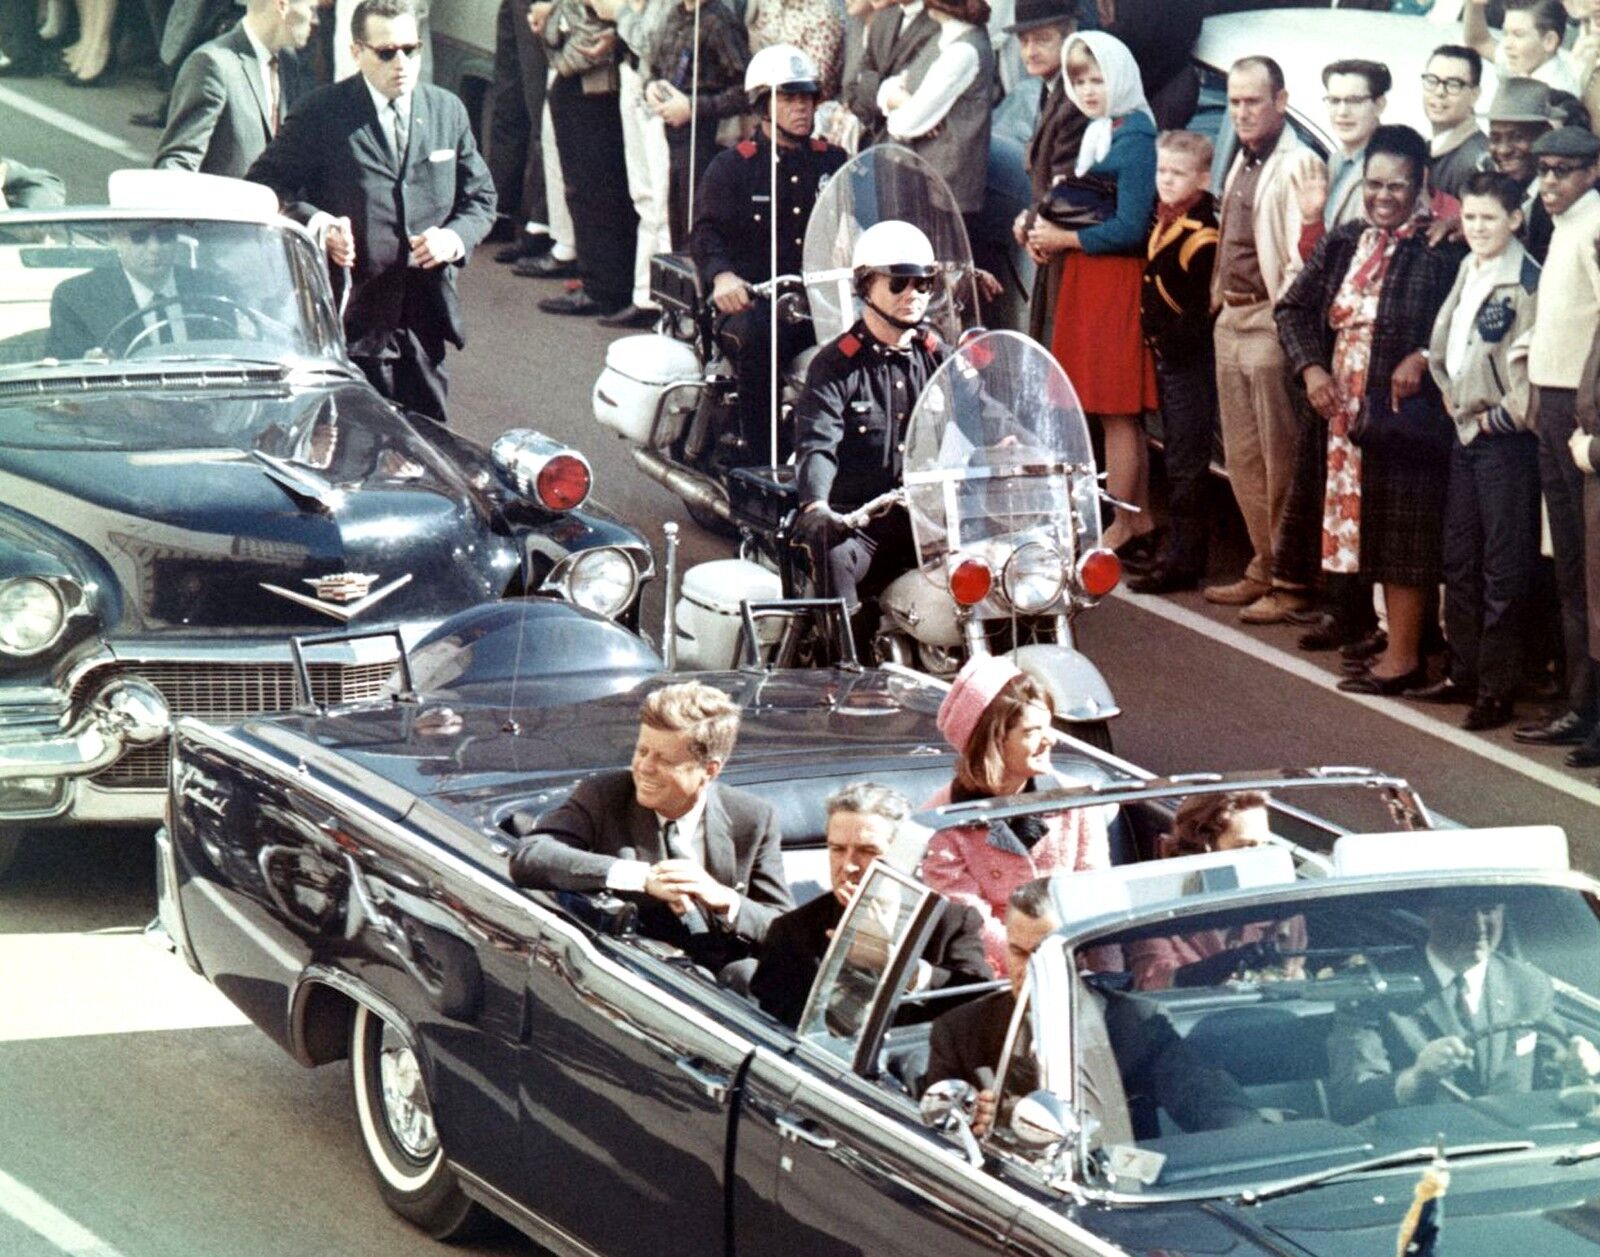 President John F. Kennedy in Dallas Moment Before Assassination-1963 LARGE PHOTO